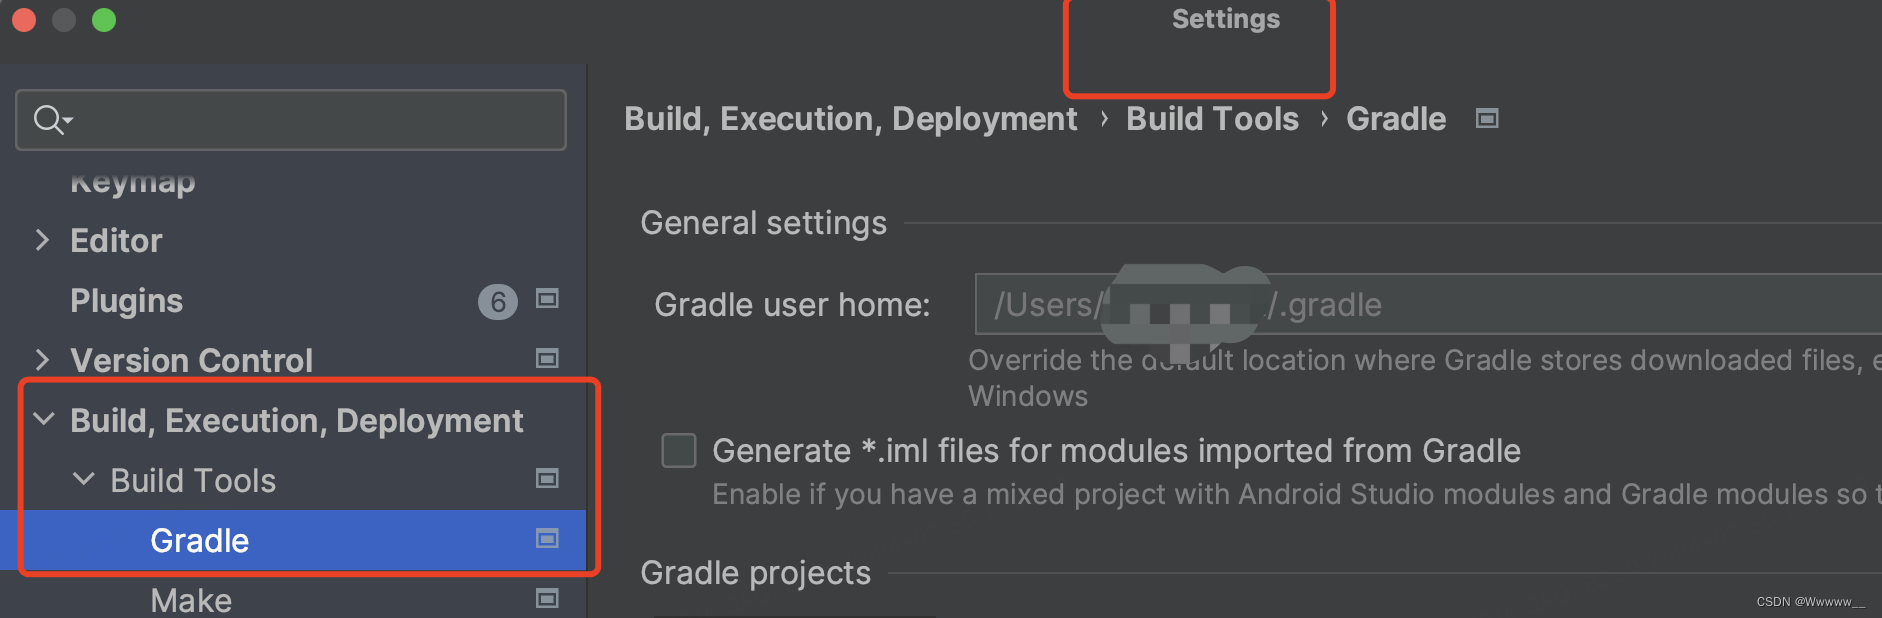 Android Studio | sync时报错到Gradle，显示Connection timed out的解决方案